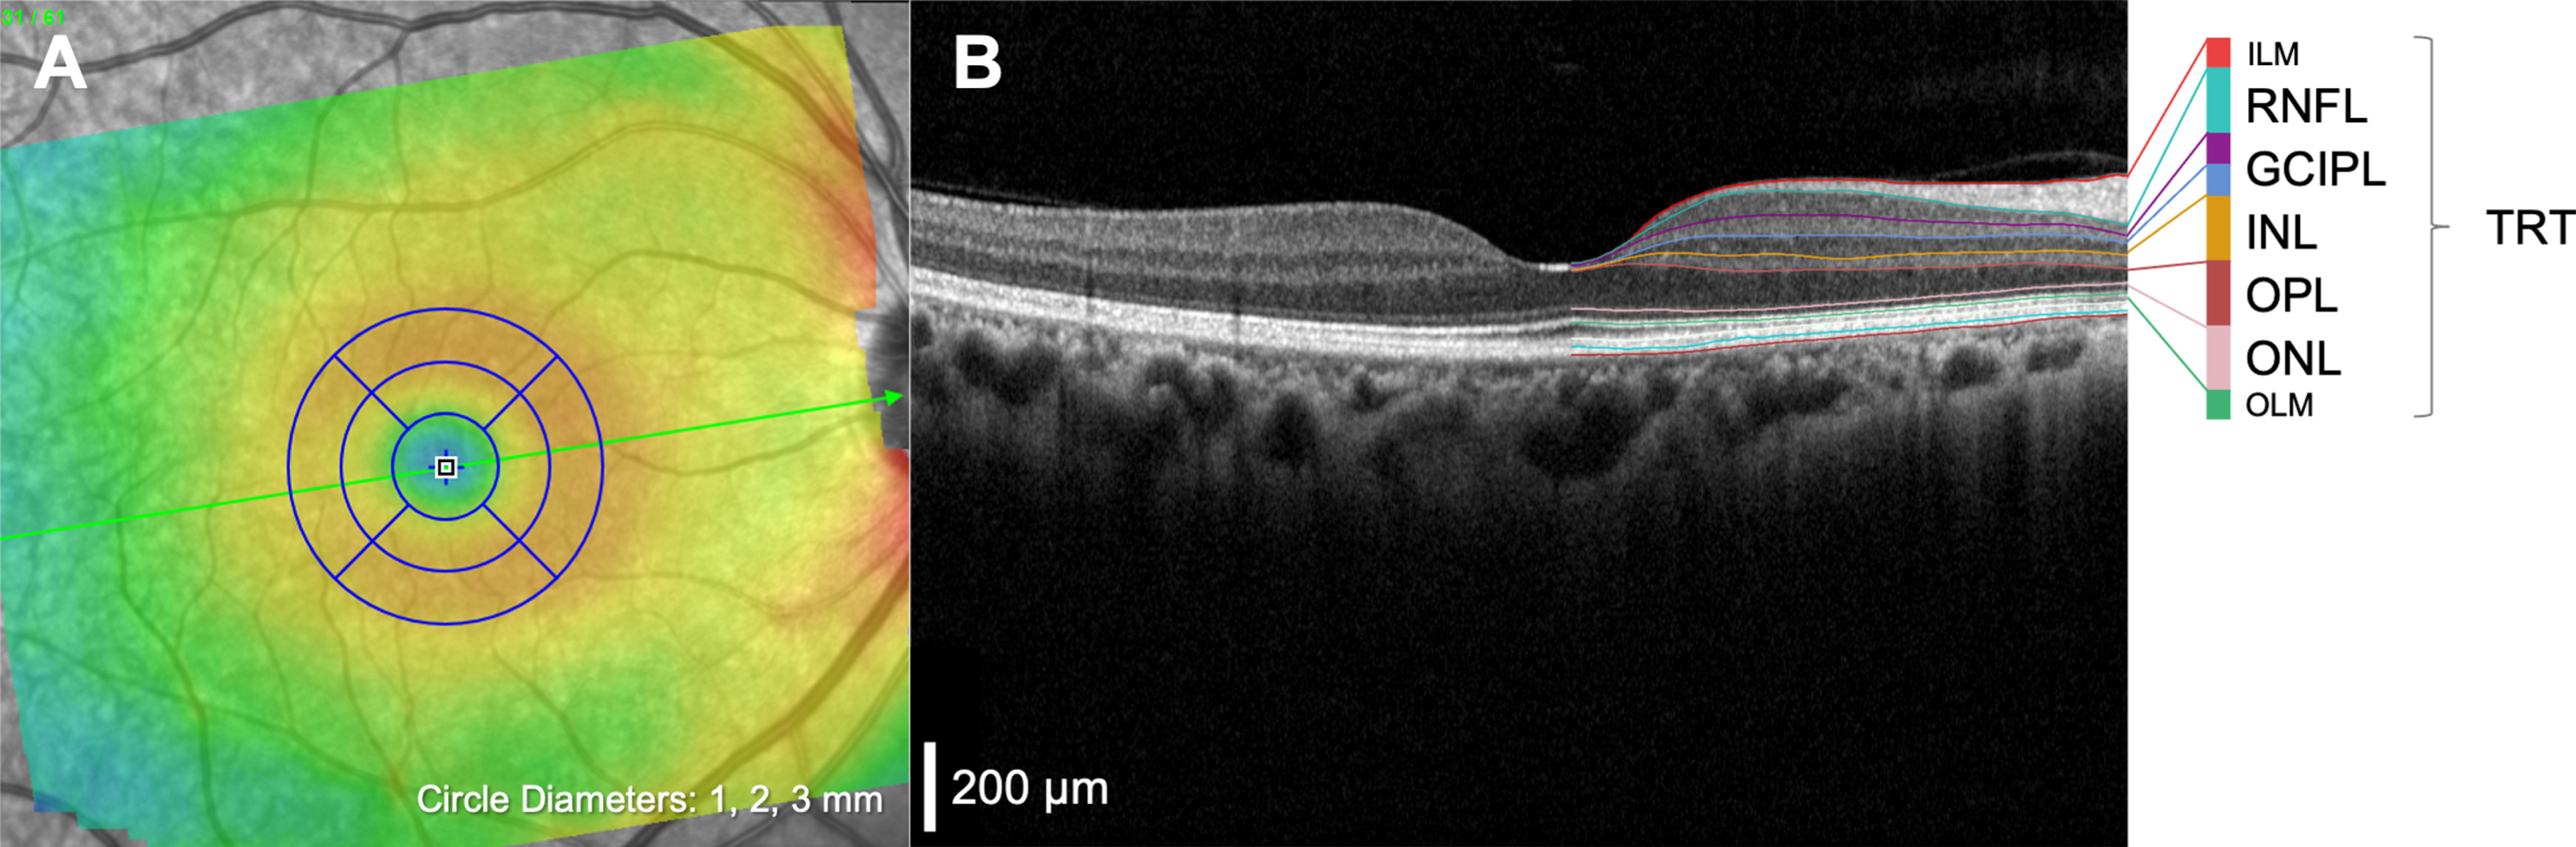 Example macular OCT scan. A) A macular volume scan with an Early Treatment Diabetic Retinopathy Study [ETDRS] grid overlaid for retinal layer thickness profile analysis. B) Corresponding cross section [green line on panel A] illustrating the automatic segmentation of retinal layers: retinal nerve fiber layer, RNFL; ganglion cell inner plexiform layer, GCIPL; inner nuclear layer, INL; outer plexiform layer, OPL; outer nuclear layer, ONL and total retinal thickness, TRT. TRT is a measurement that spans from the inner limiting membrane (ILM) to the outer limiting membrane (OLM). Scale bar, 200μm.